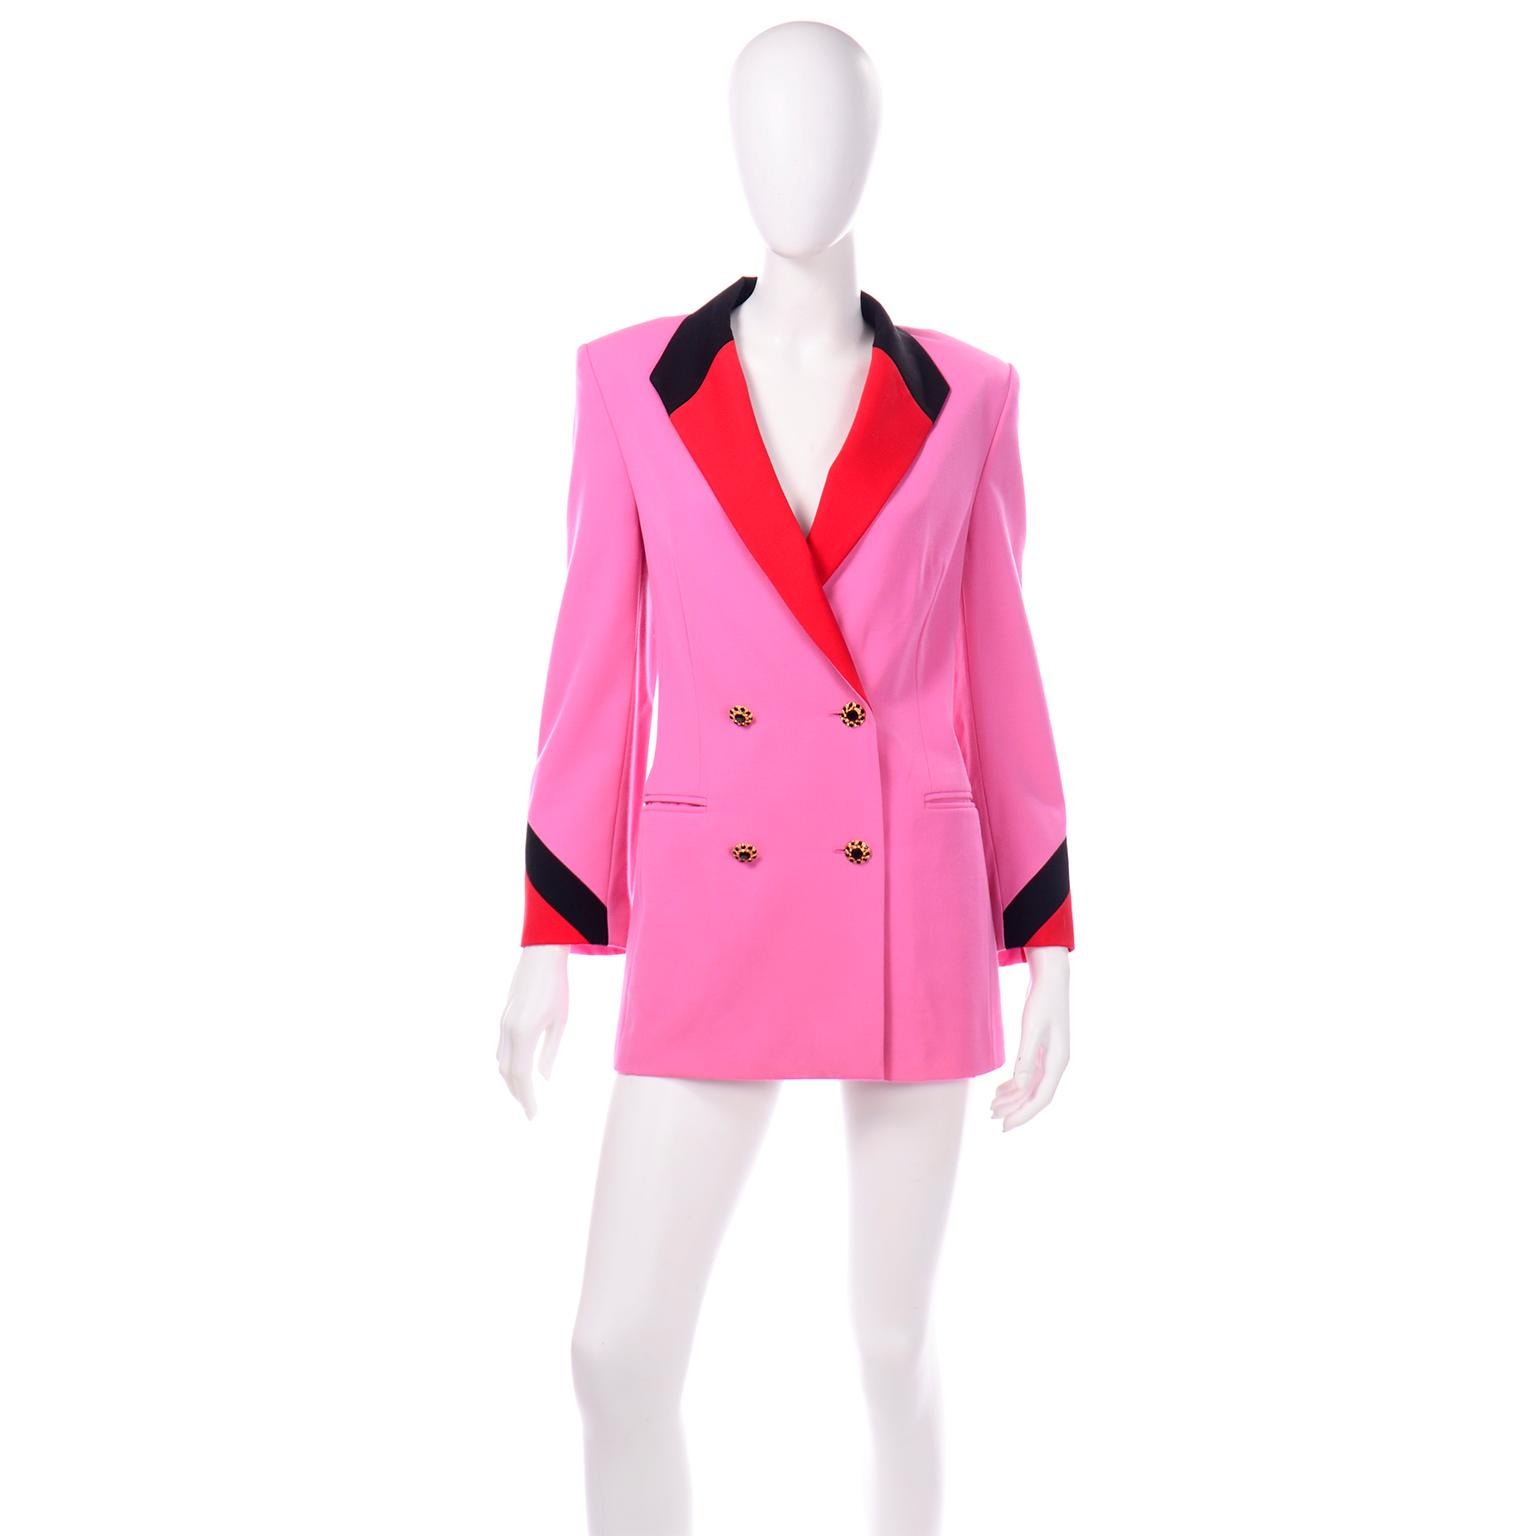 This vibrant 1980's Margaretha Ley Escada blazer is in a gorgeous pink Summer weight wool with red and black accent colors on the collar and cuffs. This longline double breasted blazer has unique gold and black rhinestone buttons on the front. The